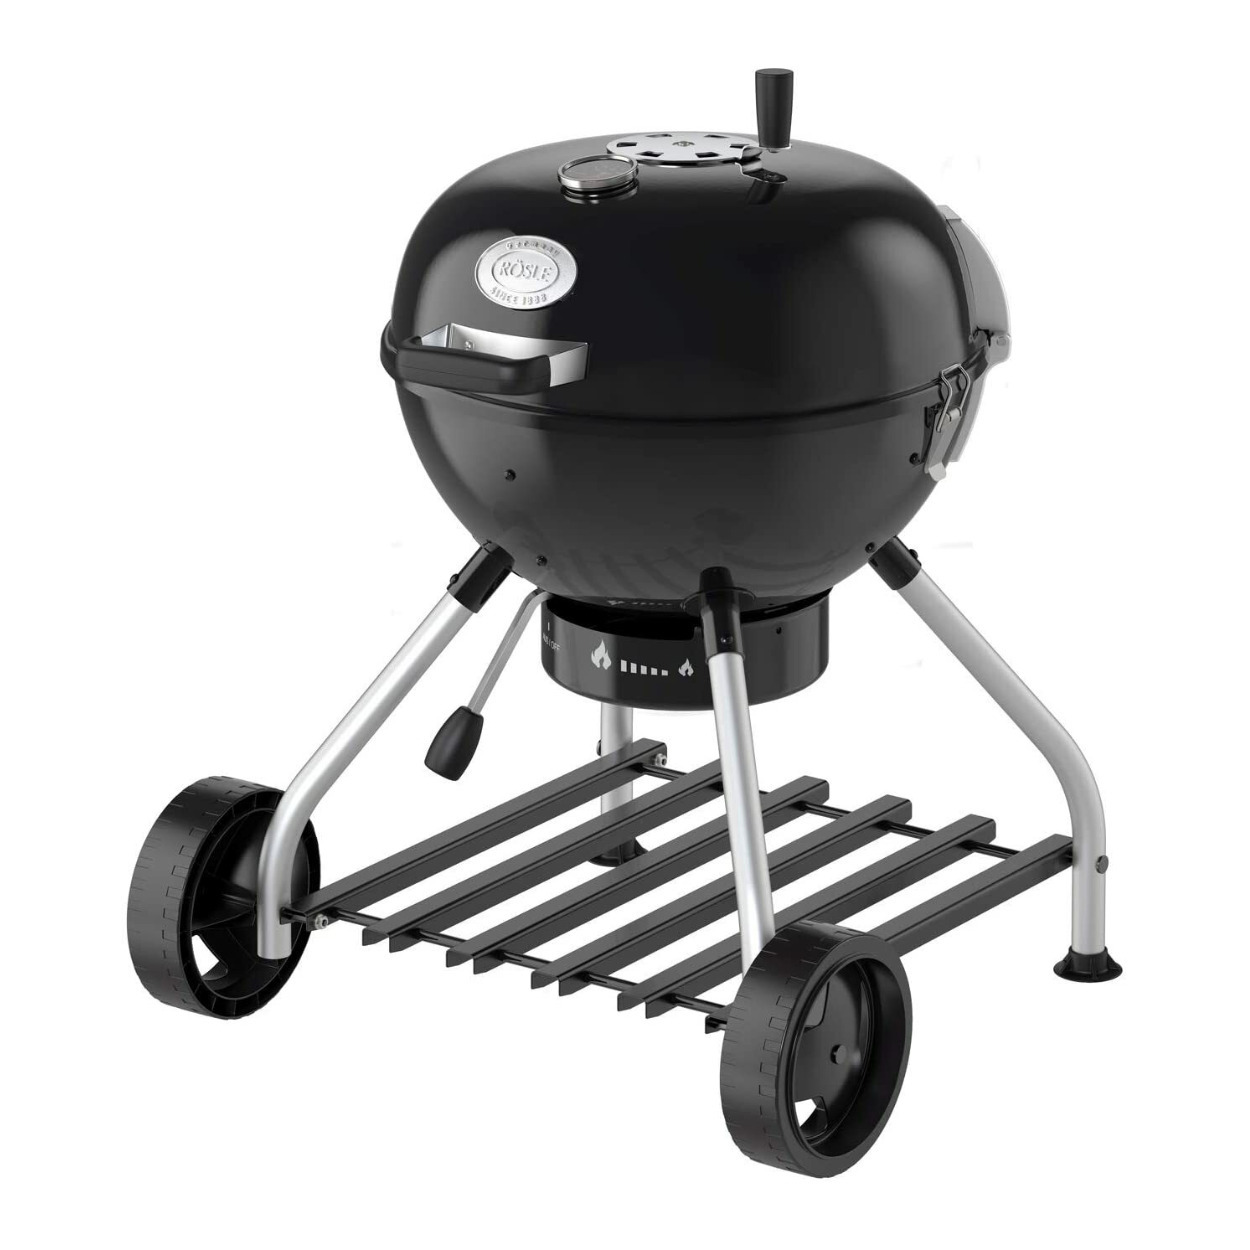 Rosle Charcoal Smoker No.1 F50-S convertible, Multi Grill, Barbecue, Smoker, Tailgater, camping, steamer - image 5 of 9